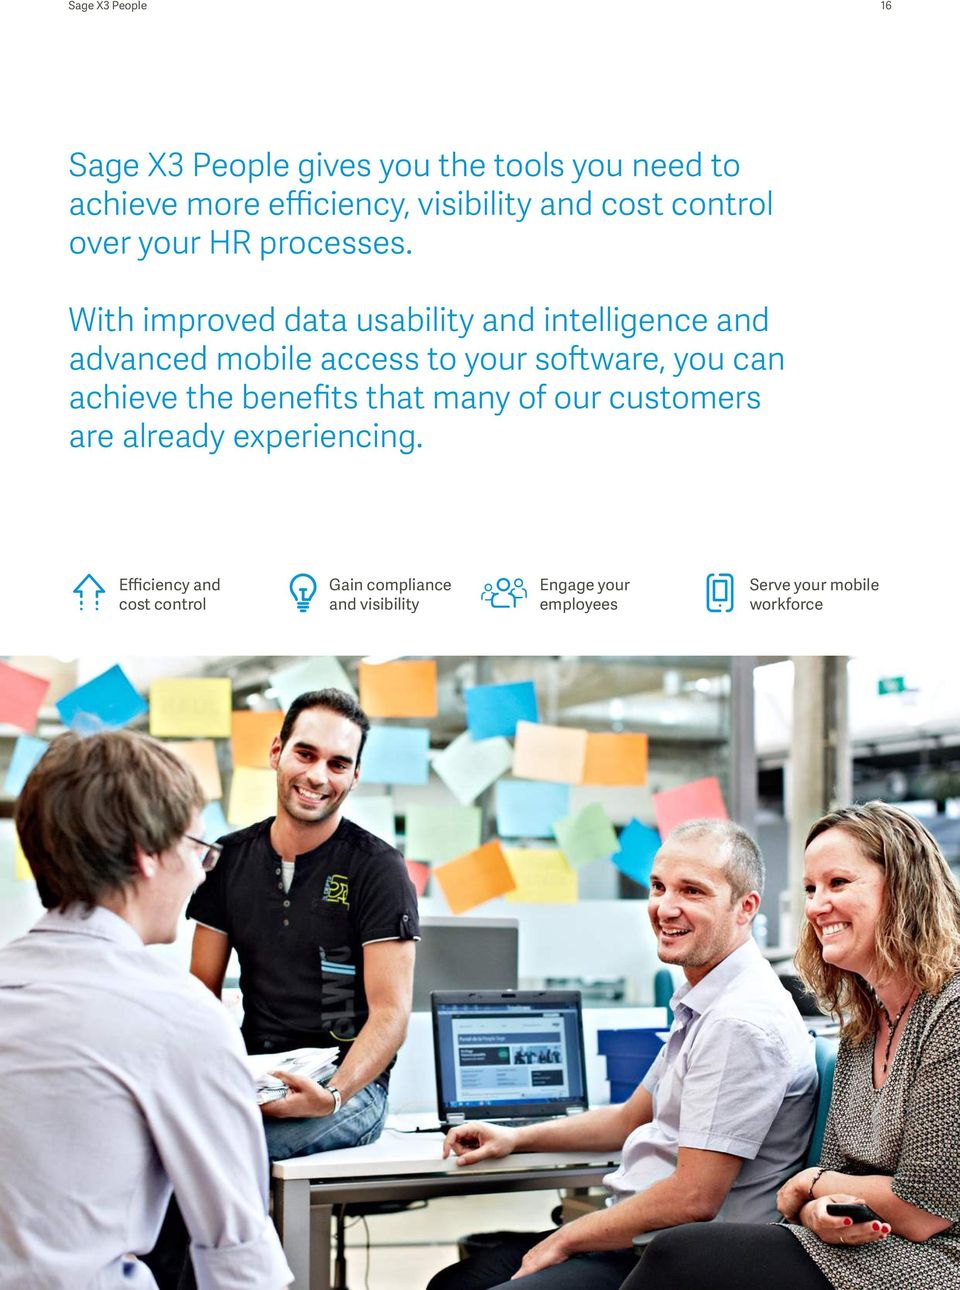 With improved data usability and intelligence and advanced mobile access to your software, you can